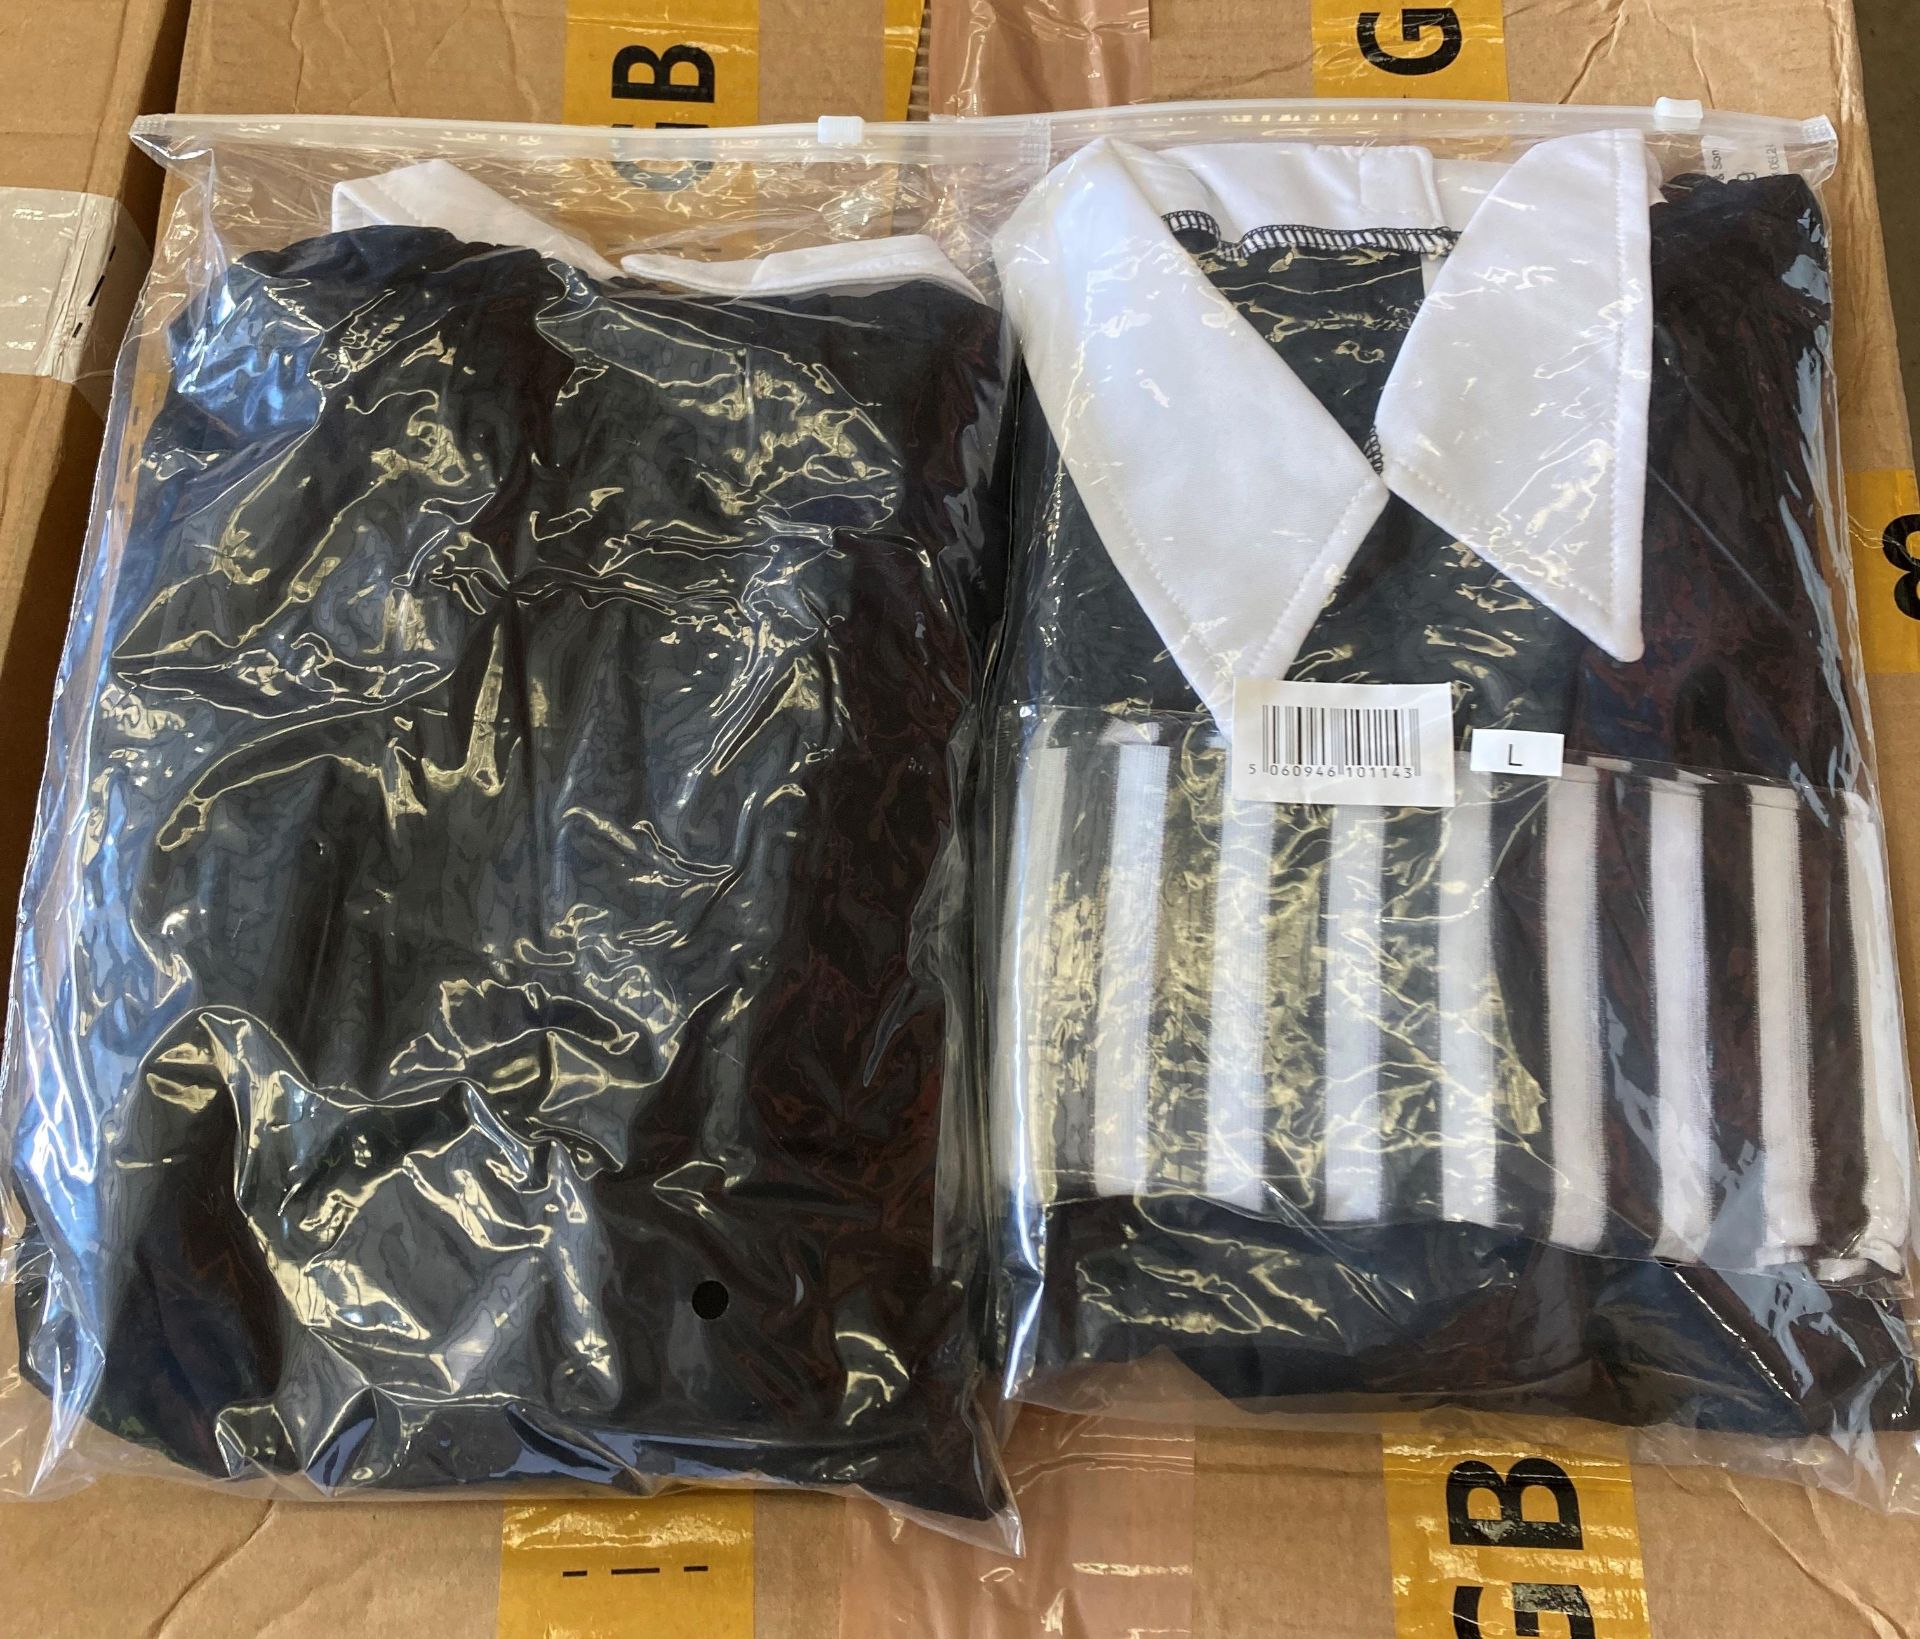 Contents to box - approximately 50 x Wednesday Addams fancy dress costumes,